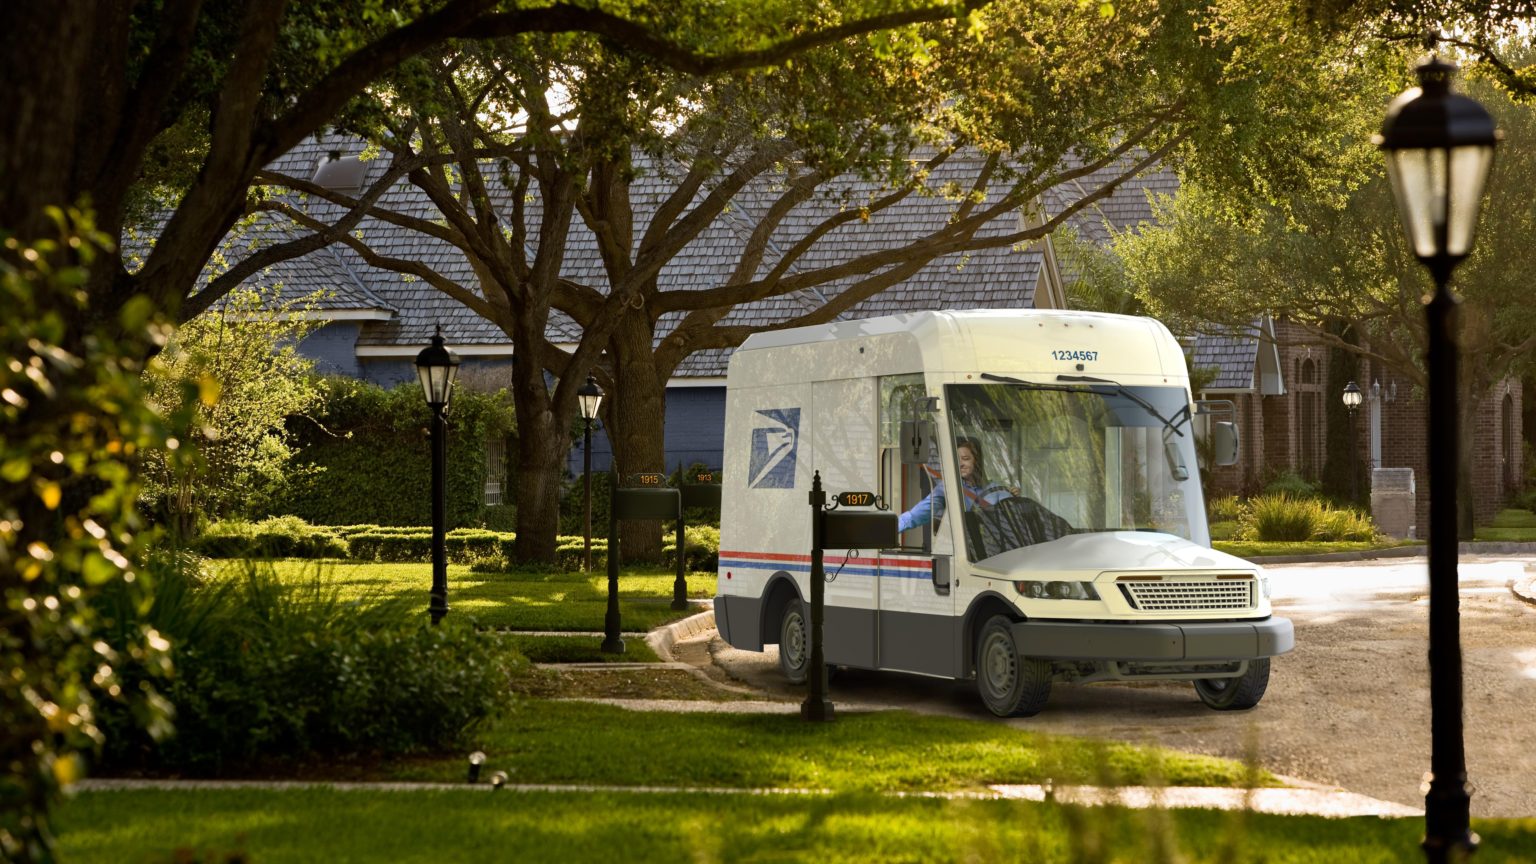 The new mail trucks are scheduled to hit the streets next year.